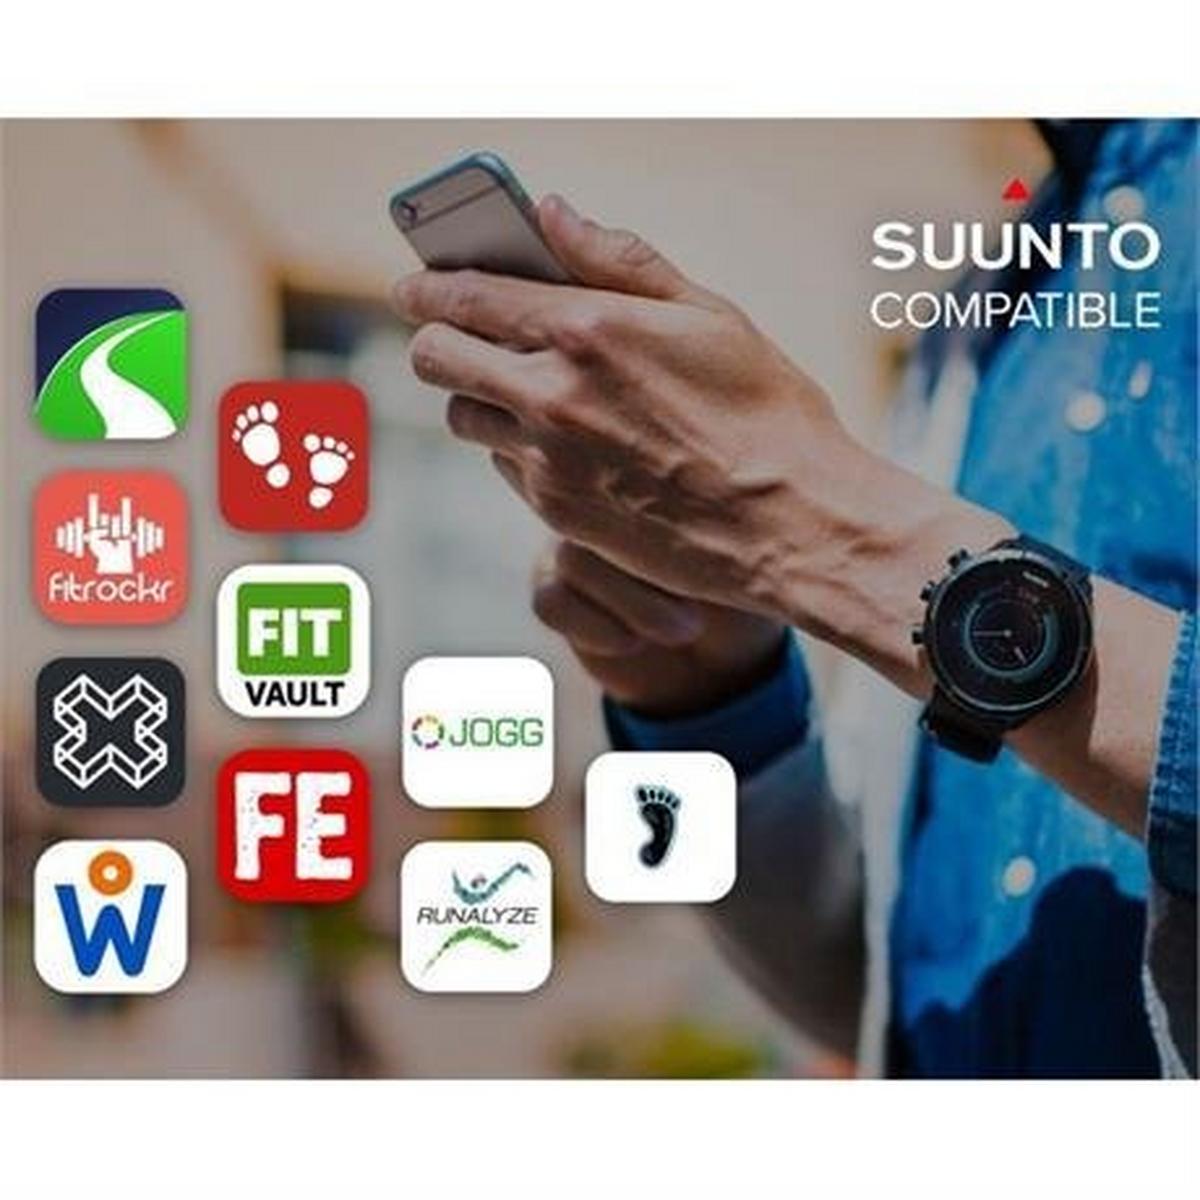 Suunto 9 Multisport GPS Watch with BARO and Wrist-Based Heart Rate (Black)